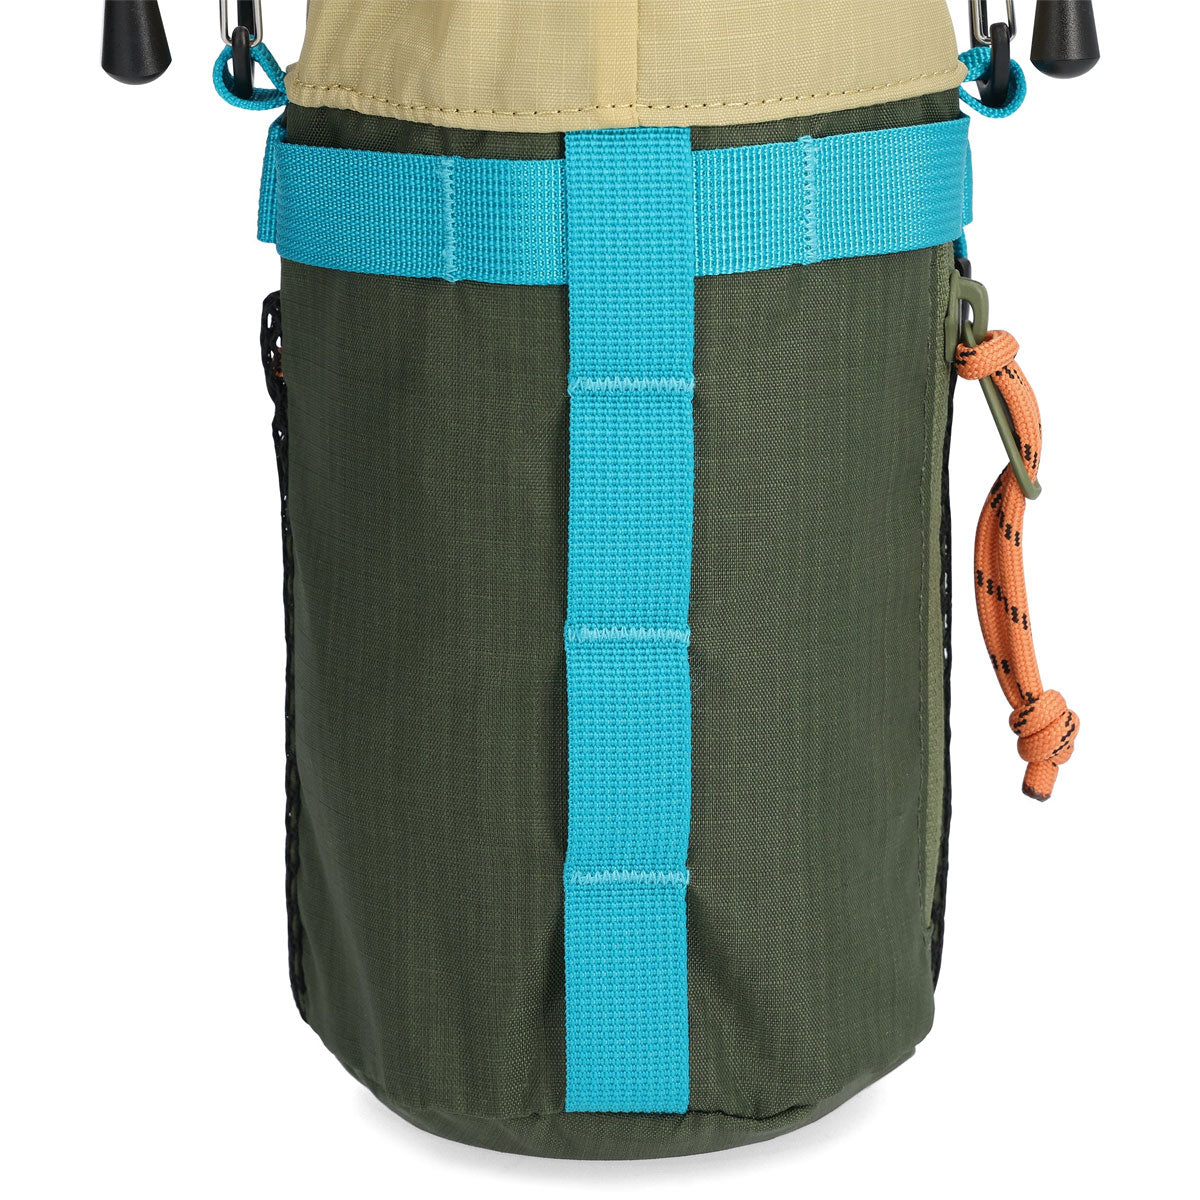 Topo Designs : Mountain Hydro Sling : Olive